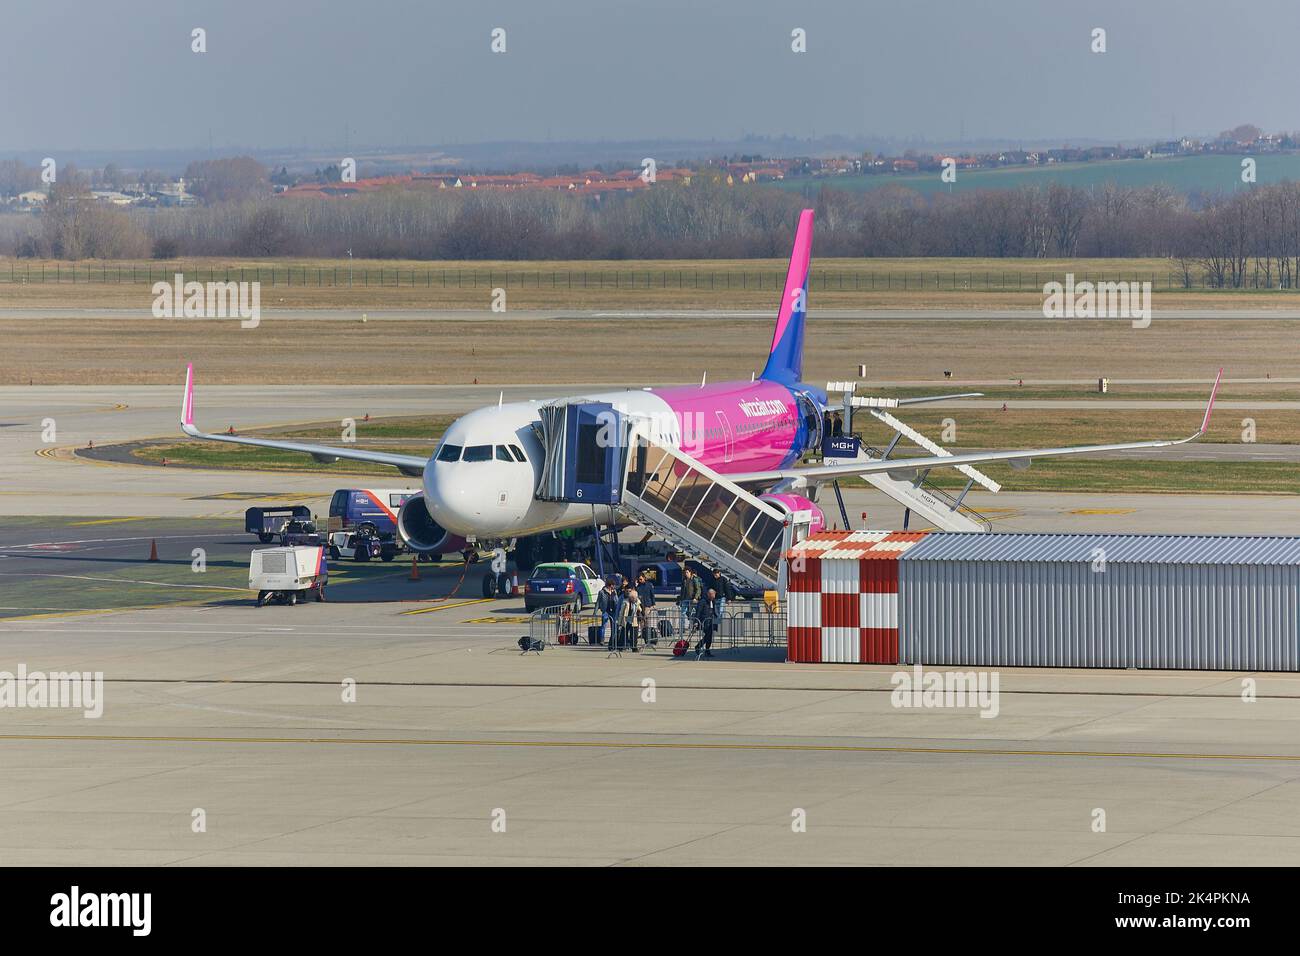 Wizzai airline at the airport Stock Photo